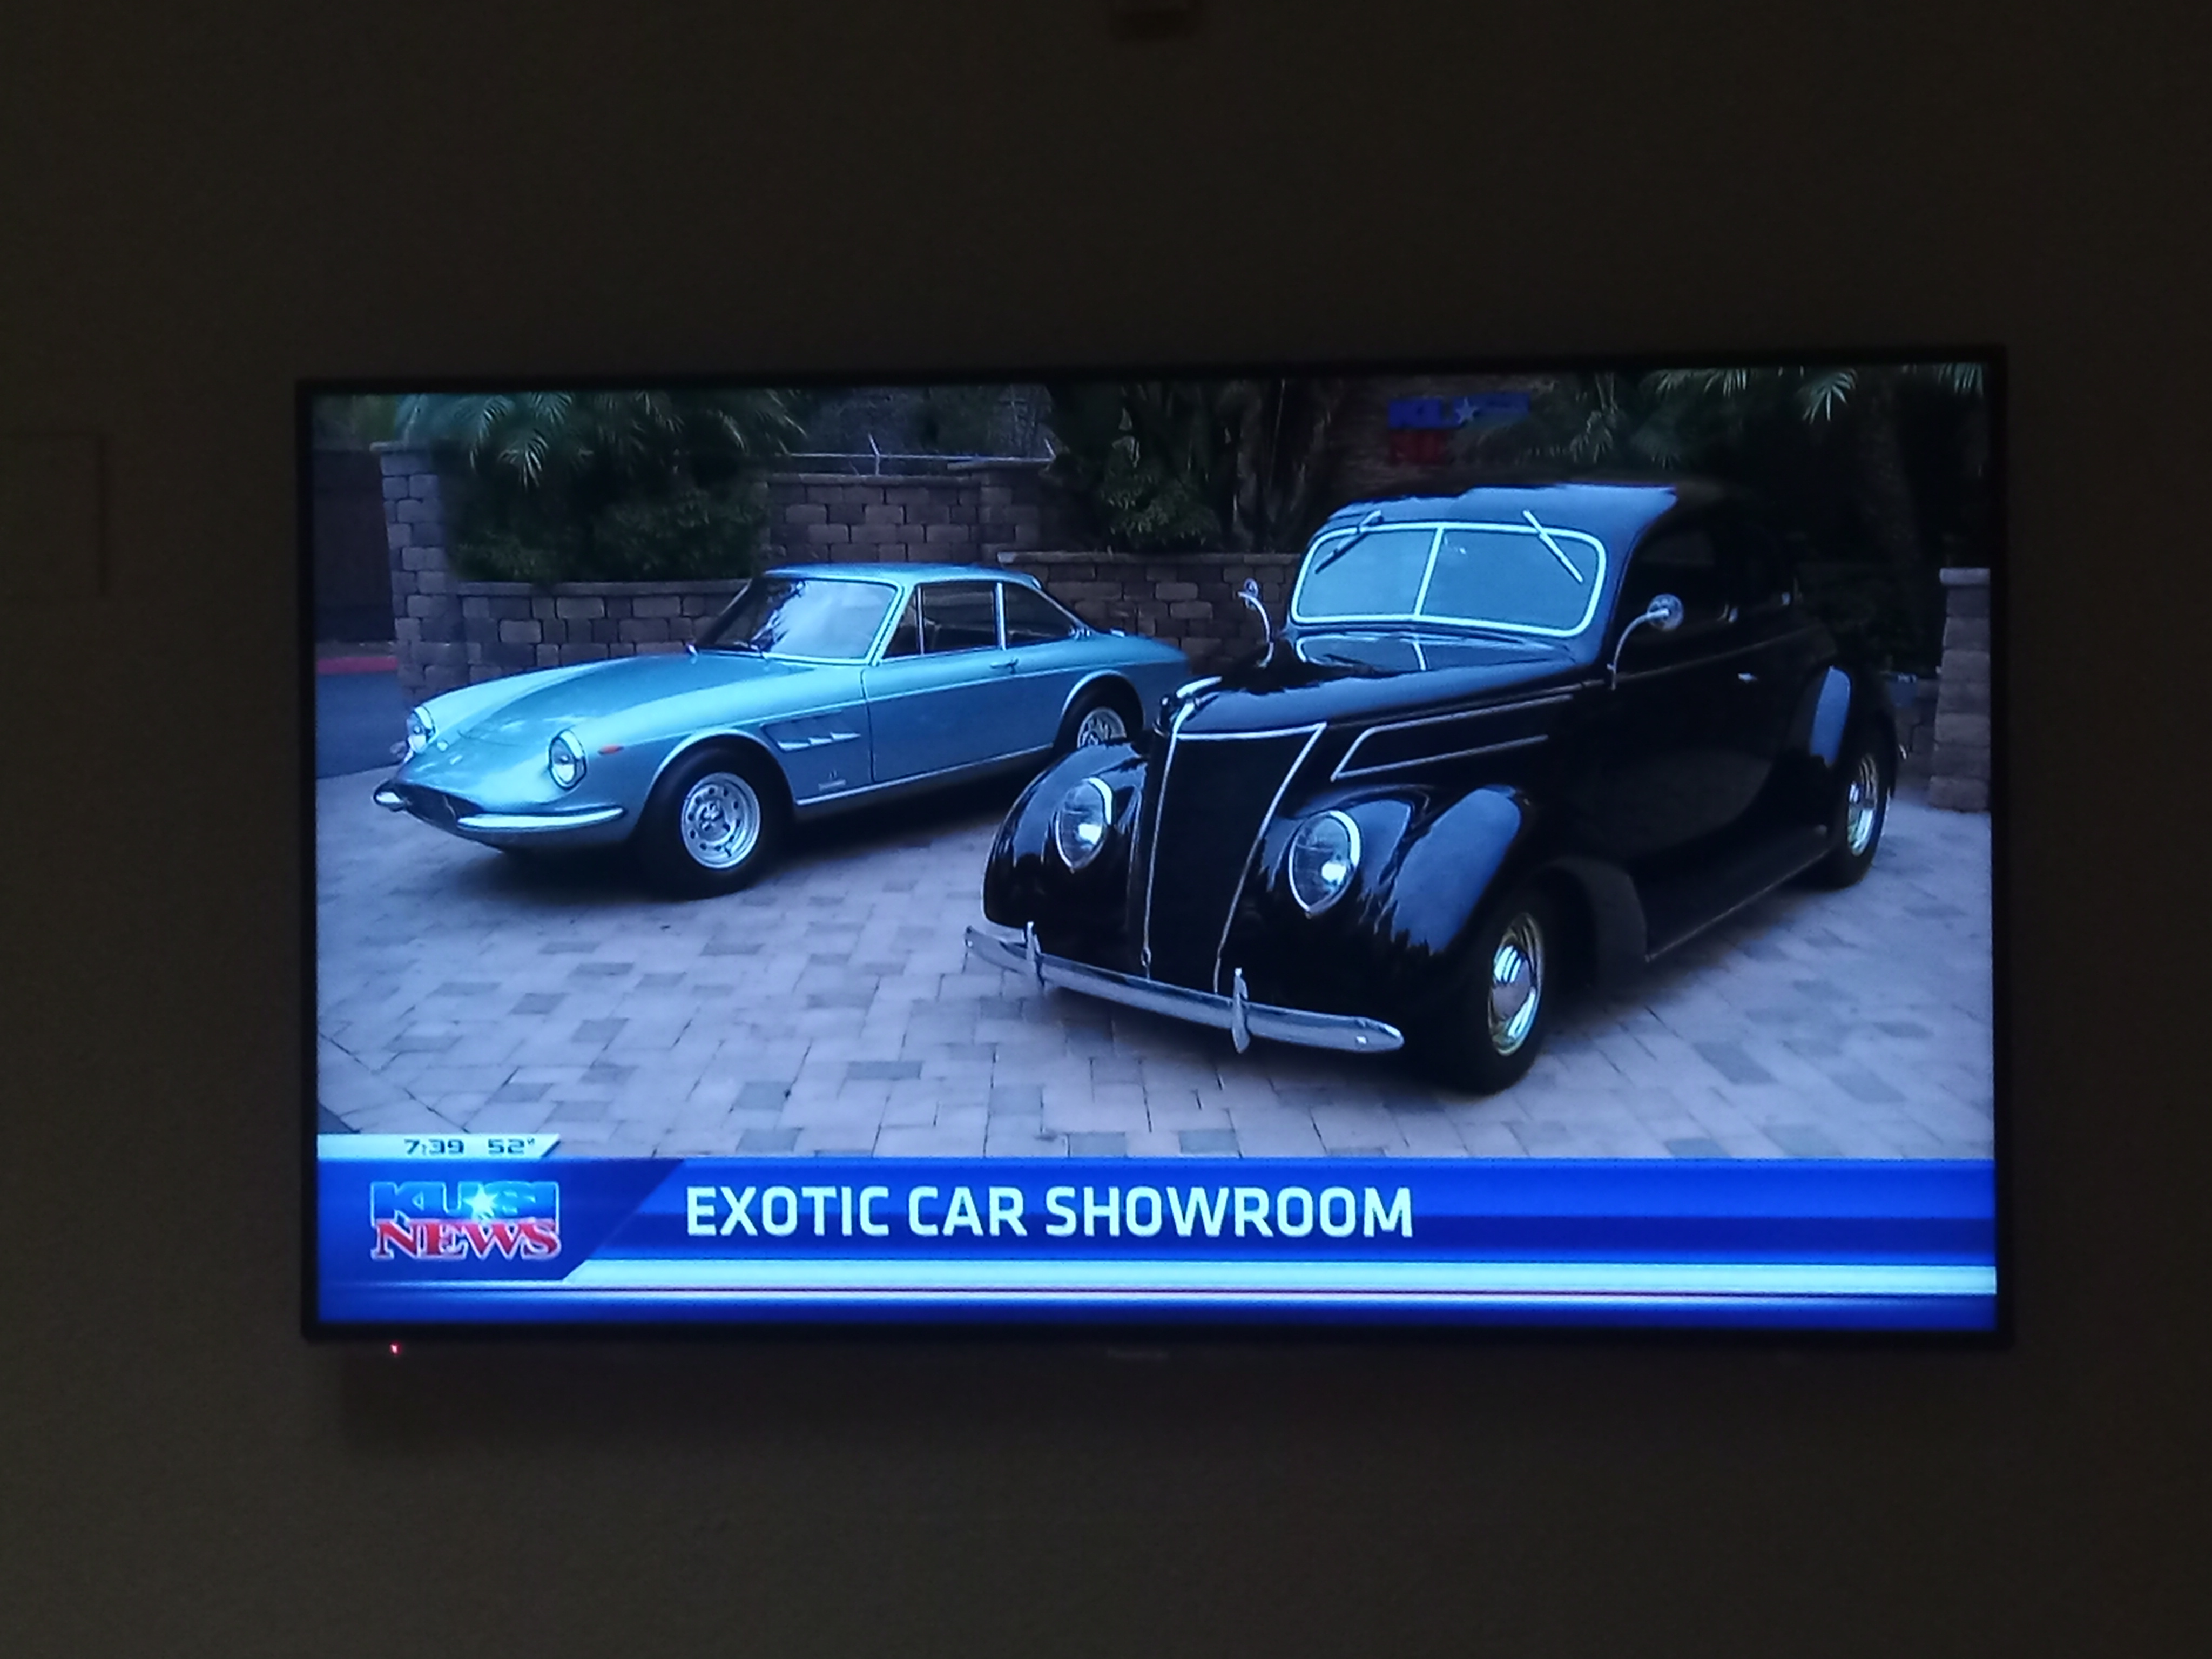 Two exotic cars featured on KUSI News